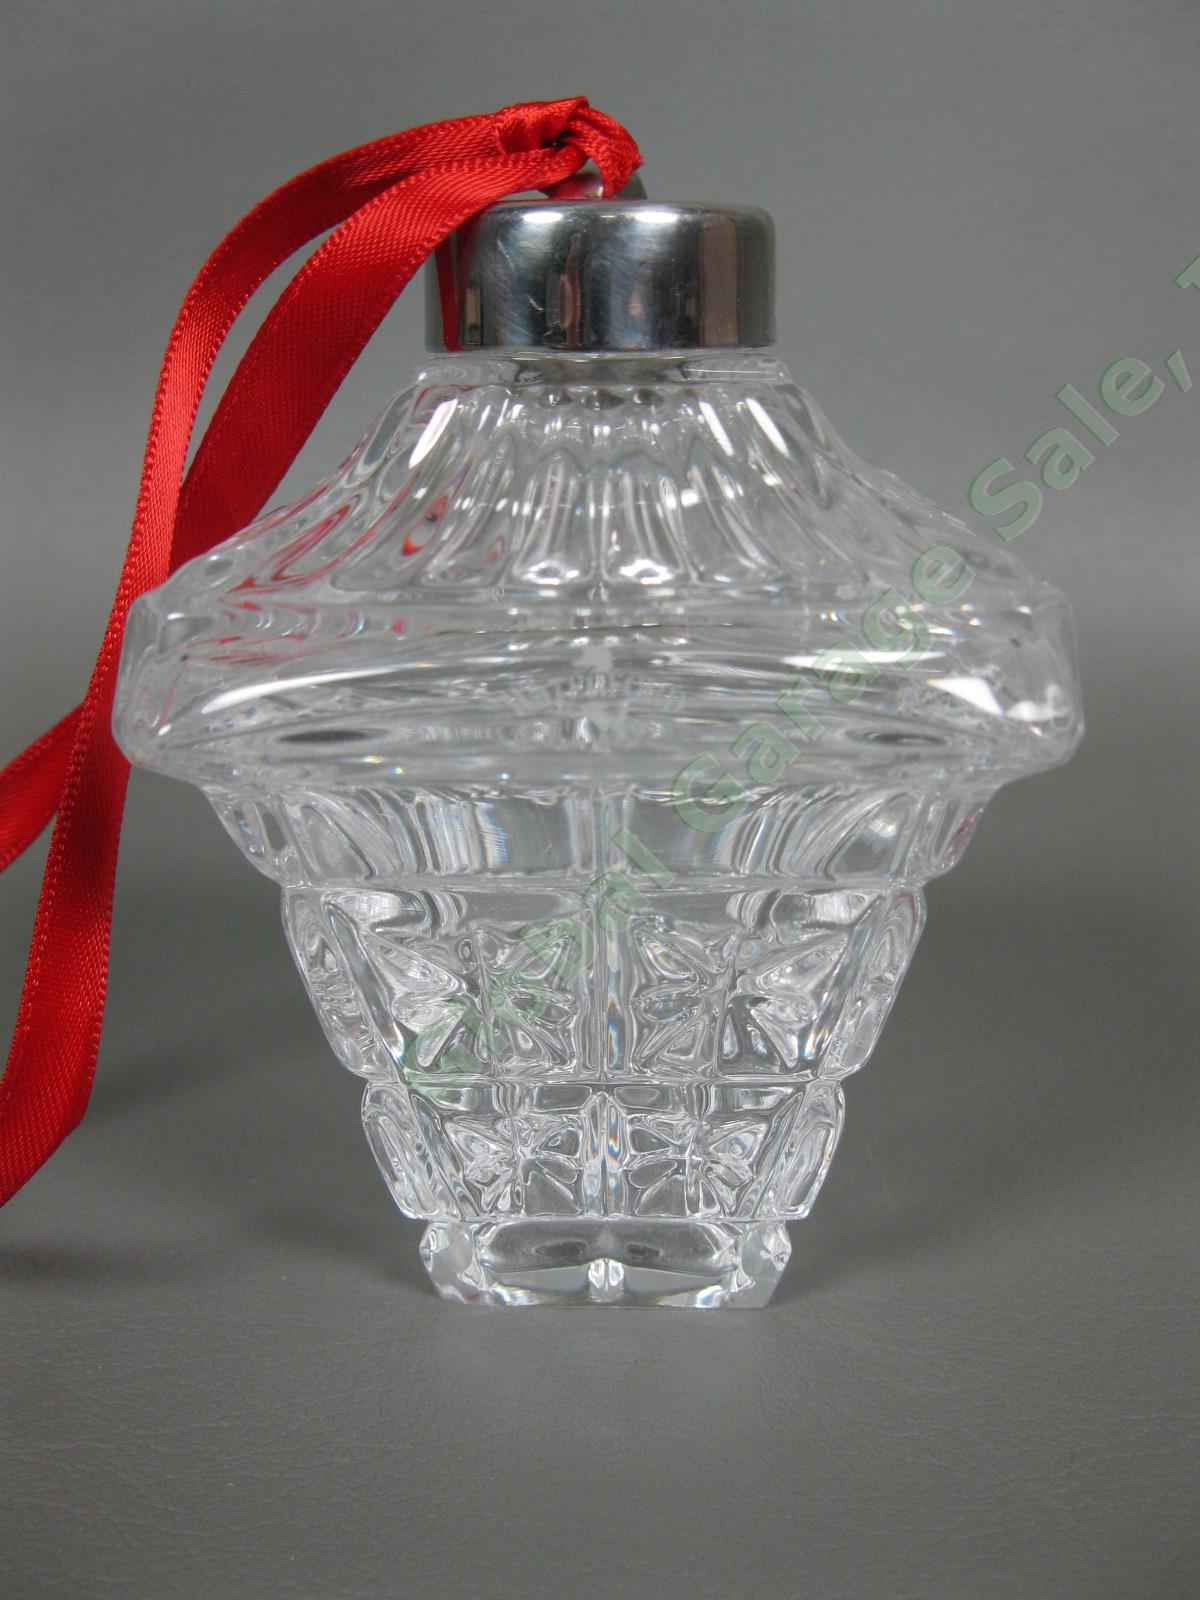 1998 Waterford Crystal Annual Christmas Ball Ornament 7th Edition MINT in Box 2